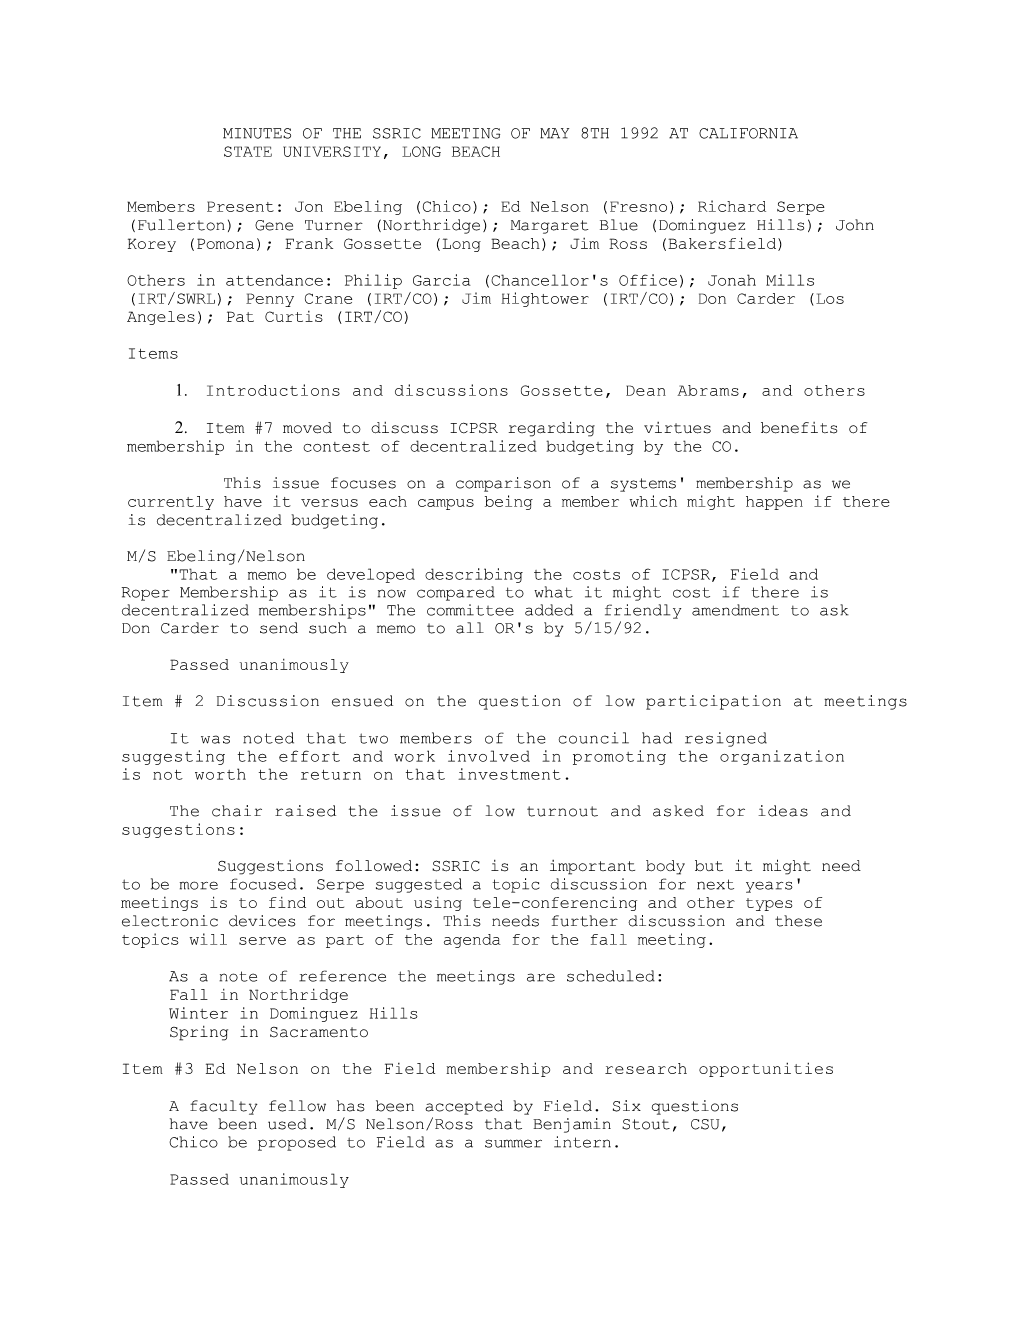 Minutes of the Ssric Meeting of May 8Th 1992 at California State University, Long Beach